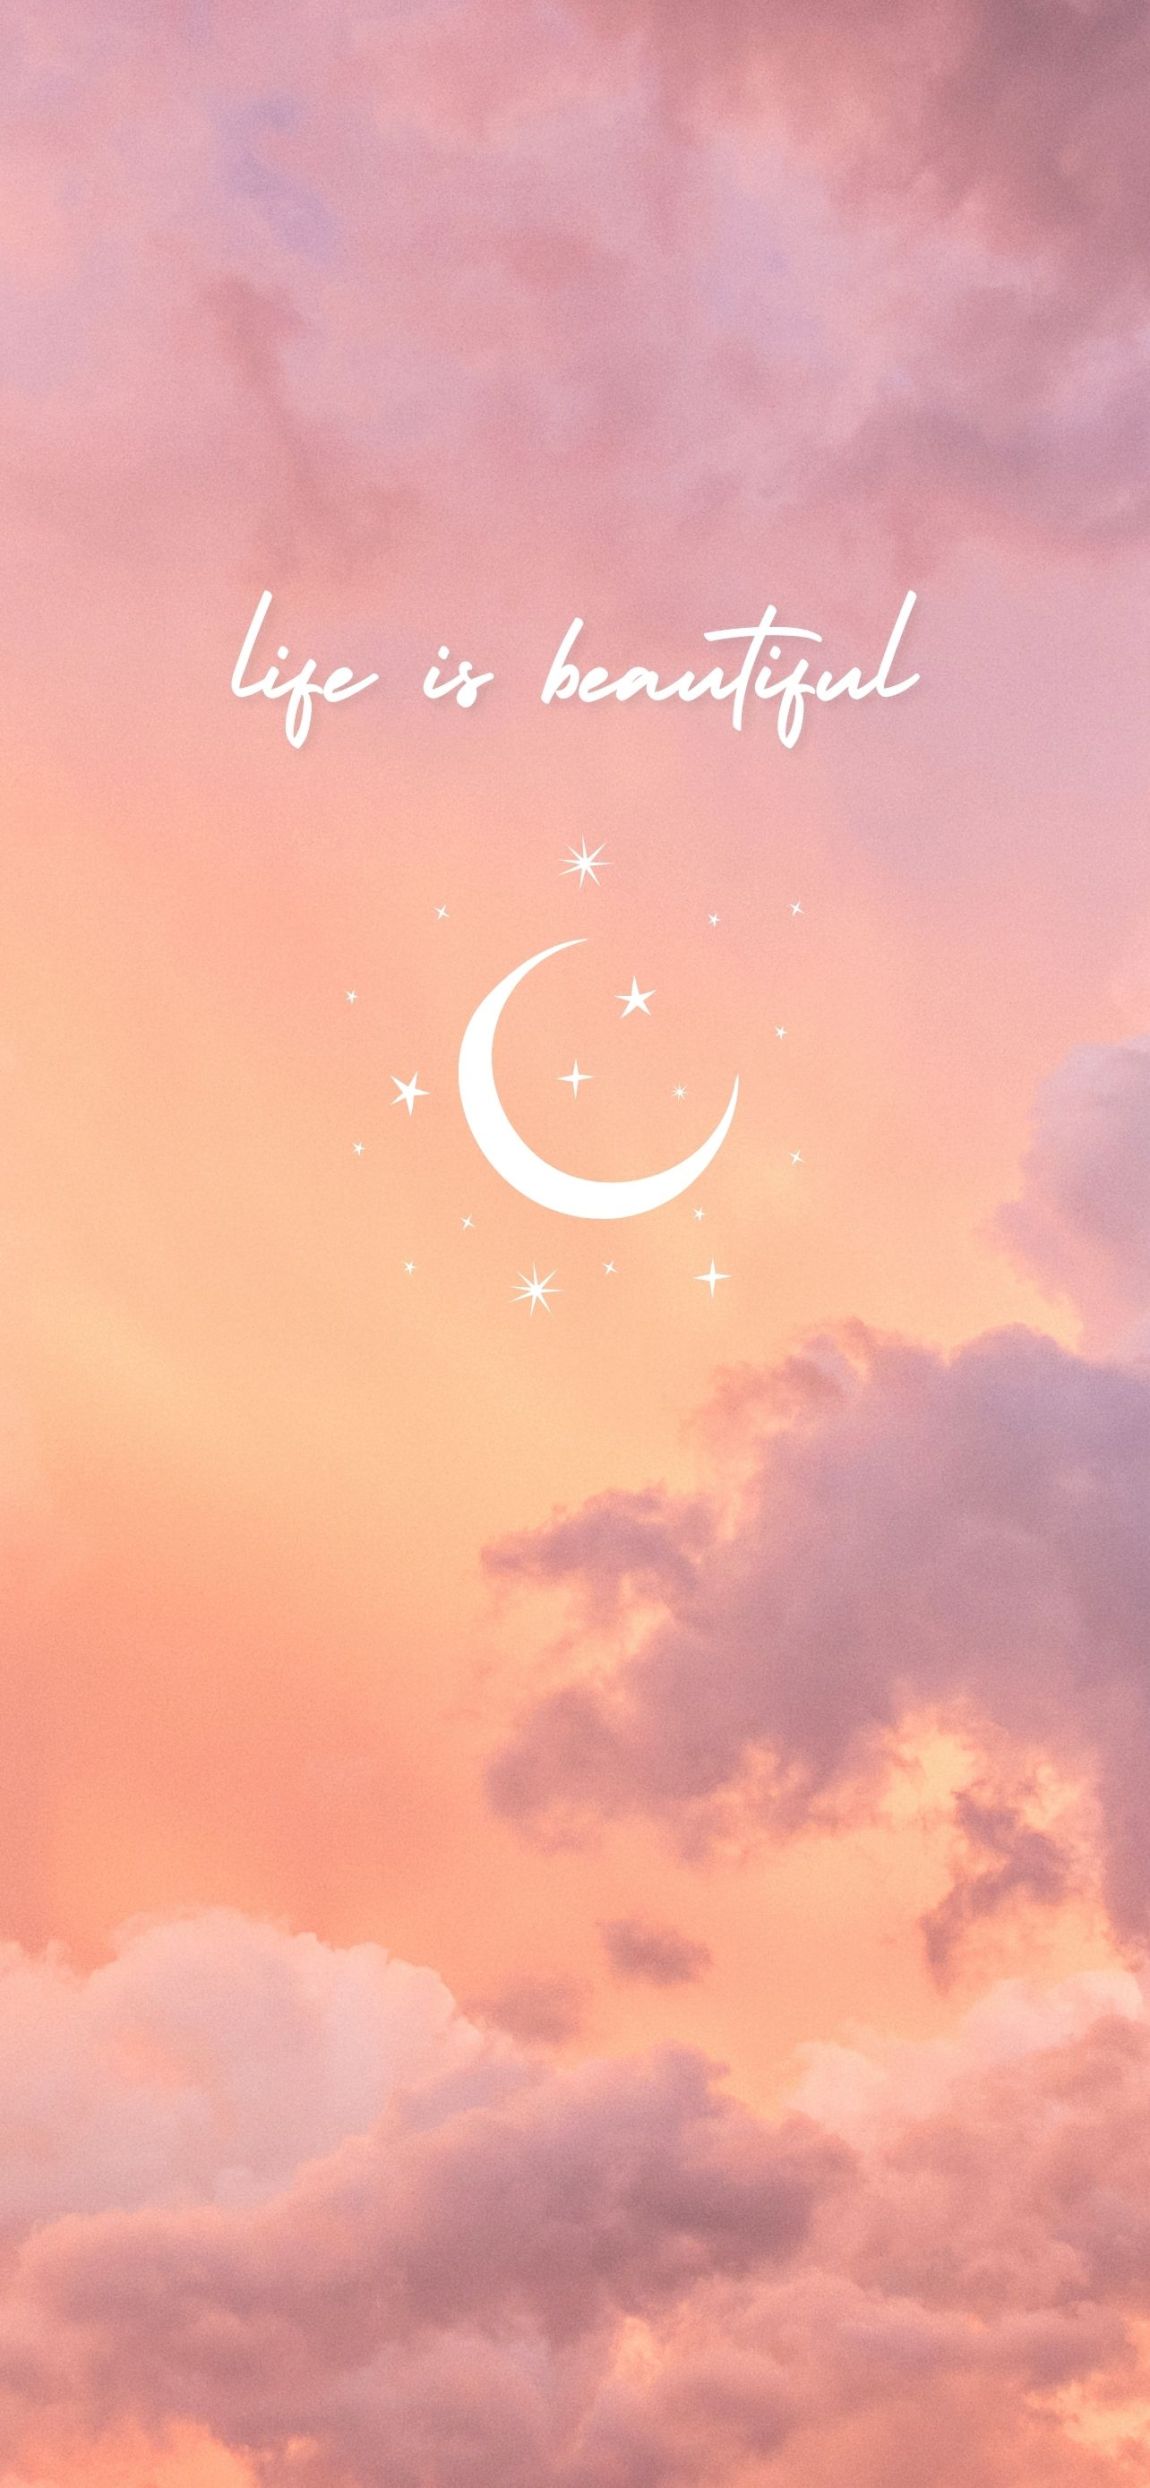 Aesthetic iPhone Wallpaper Ideas You'll Love